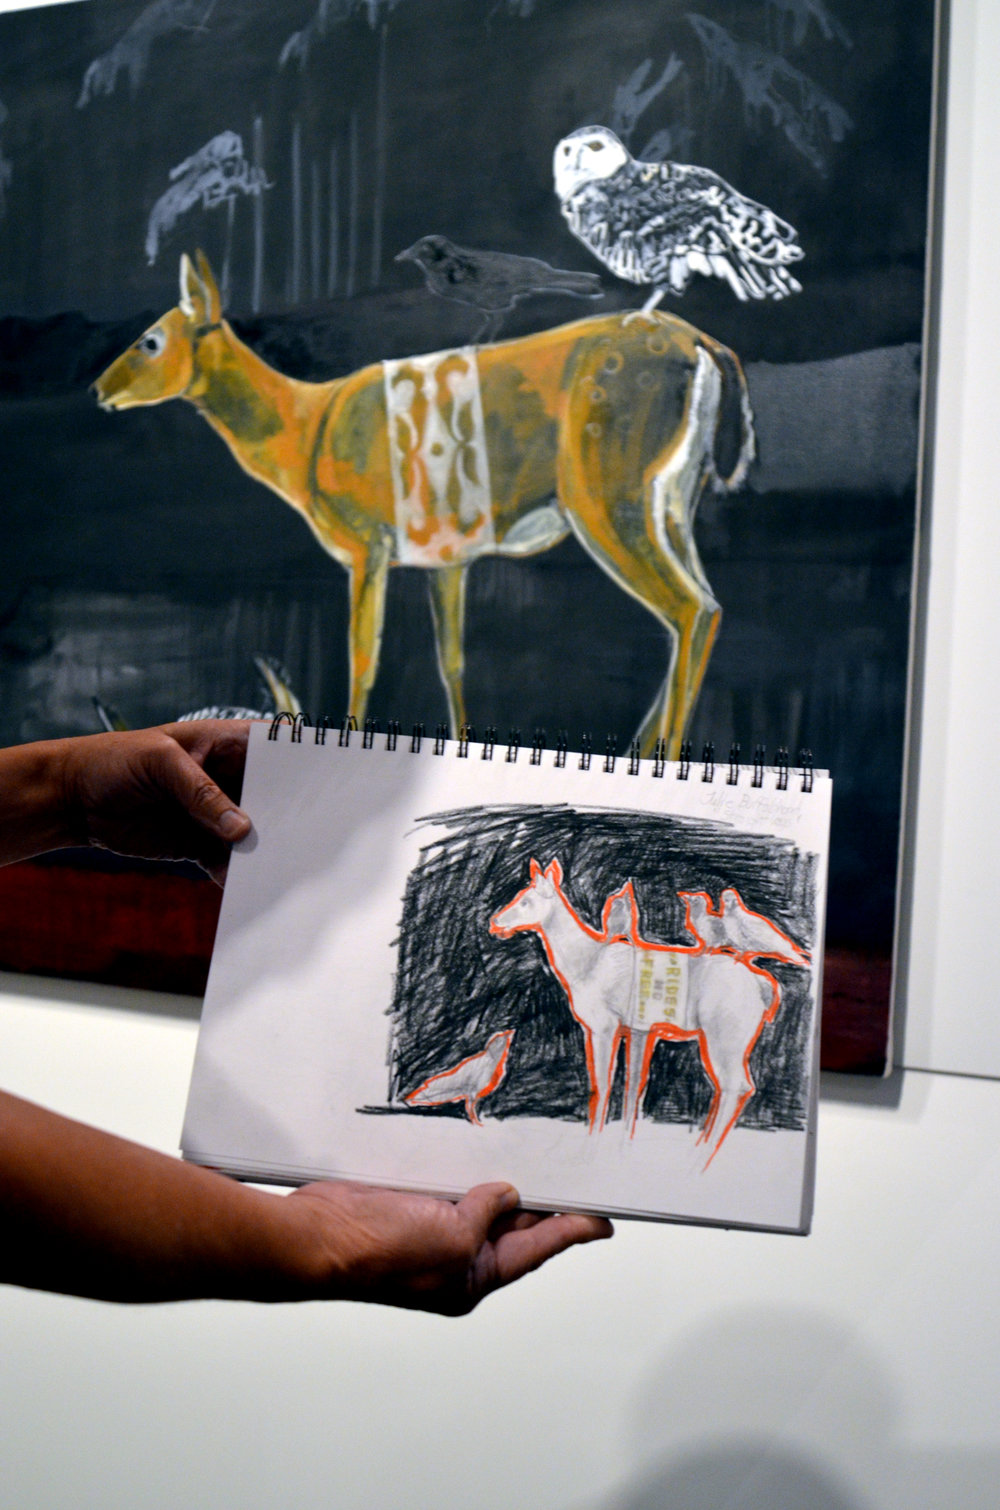 Janet Woelfle's drawing of Julie Buffalohead's "Striaght Legs" painting